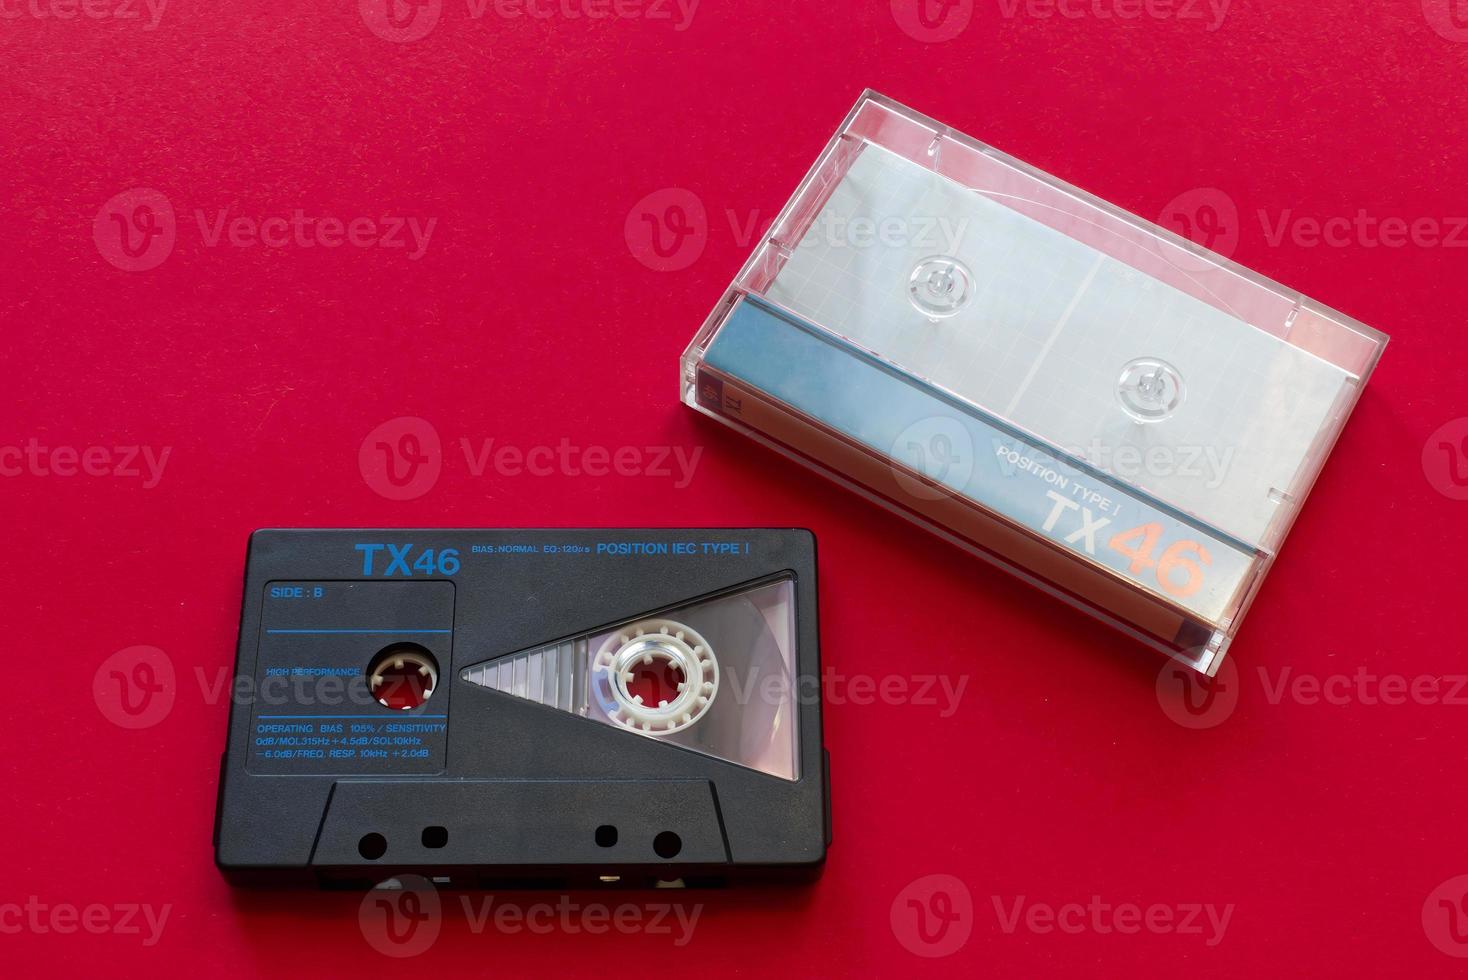 Vintage audio cassette tape and cassette tape case on red background. Technology from the 90s. photo